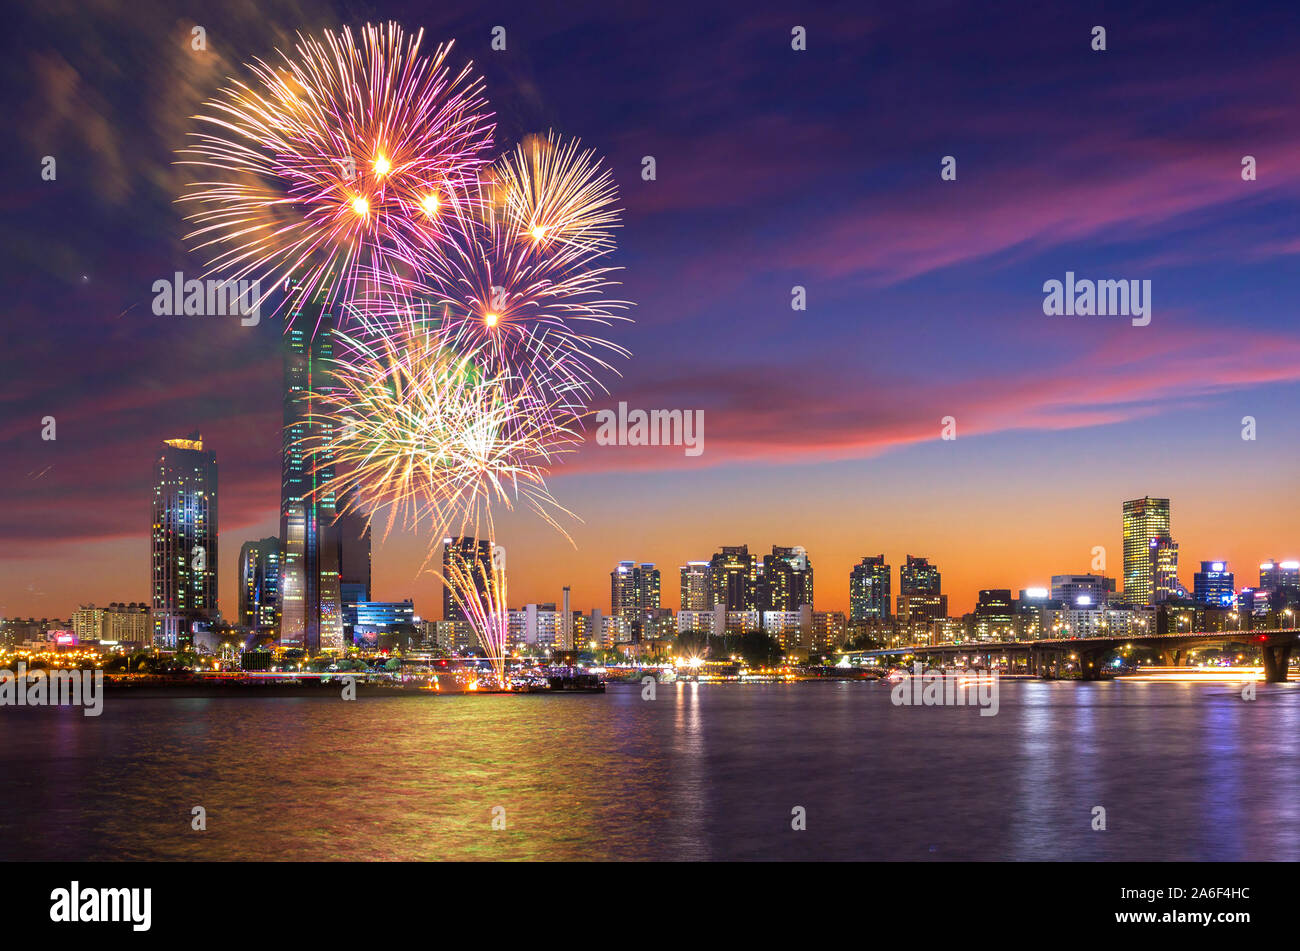 Seoul Fireworks Festival in Night city at Yeouido, South Korea. Stock Photo